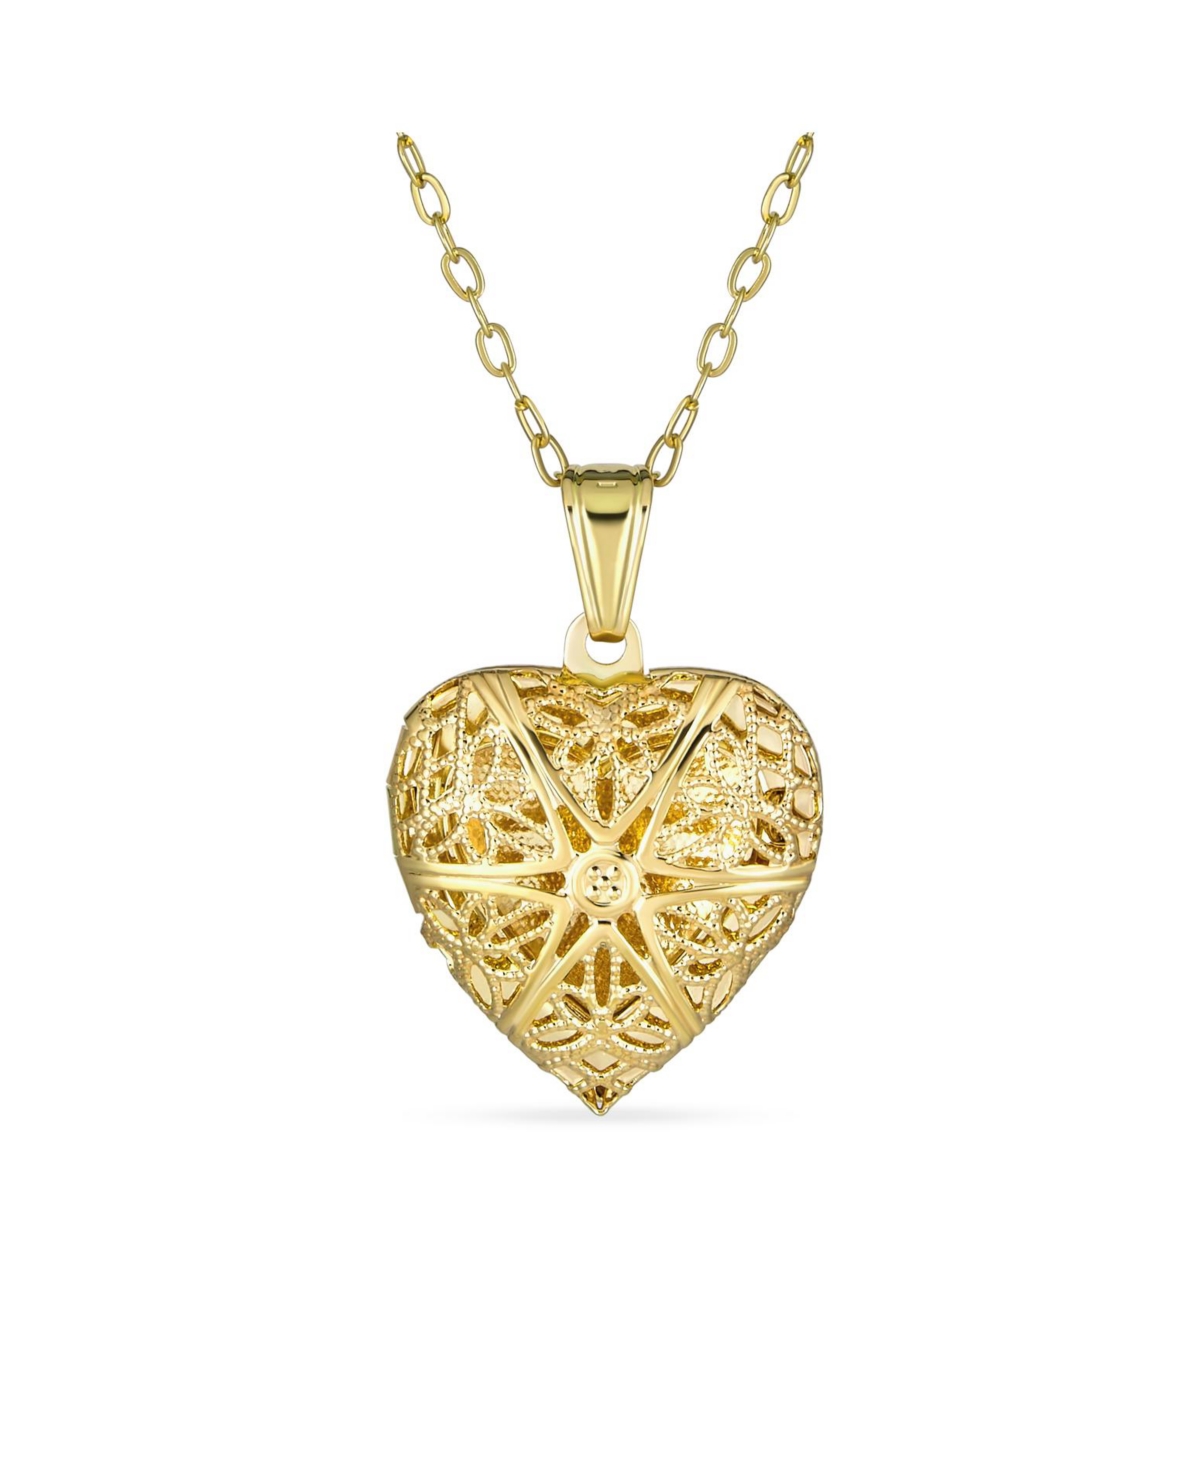 Vintage Style Filigree Star Heart Shape Aromatherapy Essential Oil Perfume Diffuser Locket Necklace For Women 18K Gold Plated - Gold-ton